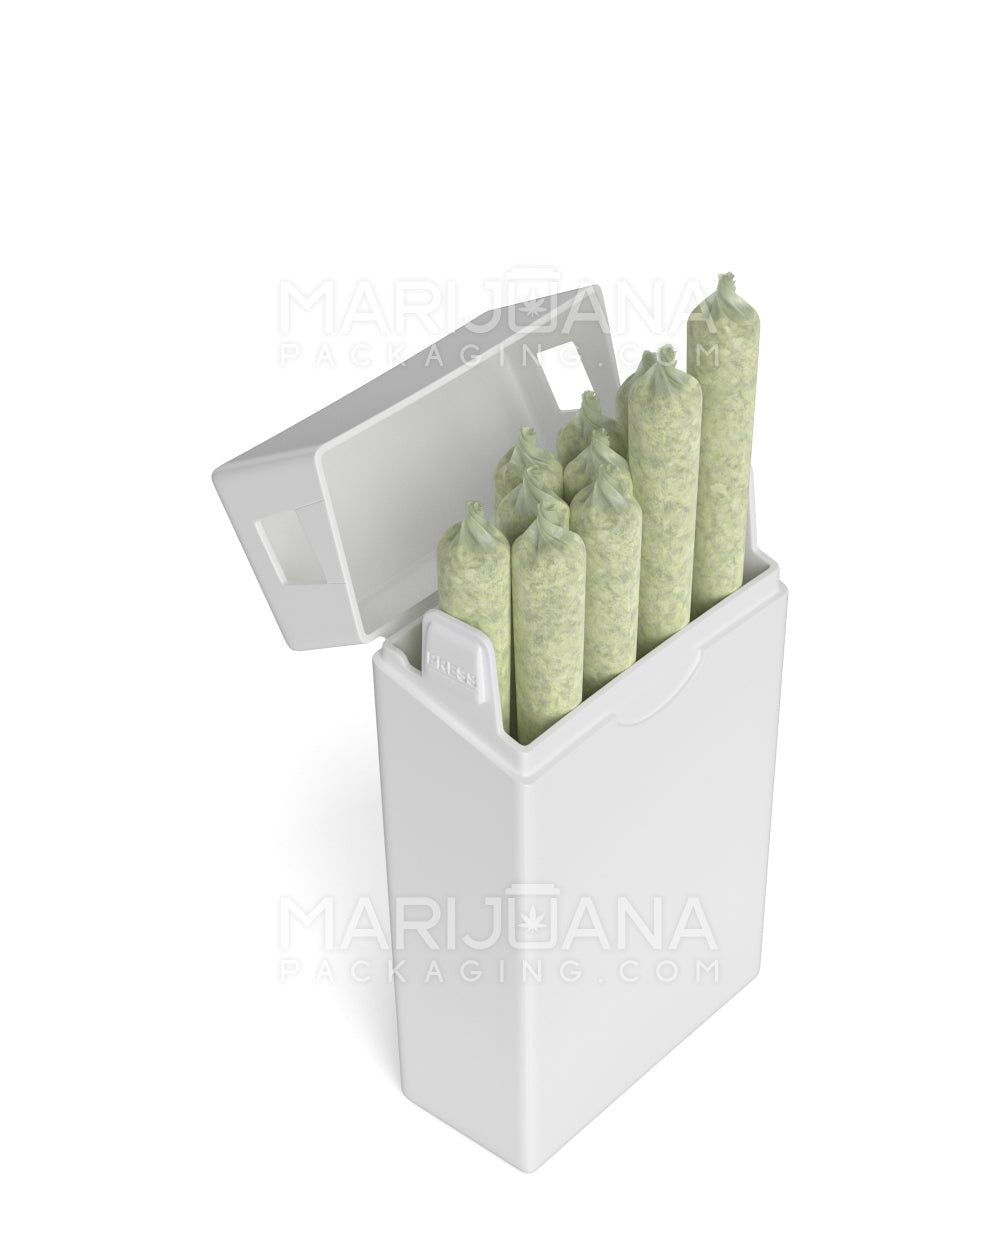 Child Resistant & Sustainable | 100% Biodegradable Pinch 'N Flip Edible & Pre-Roll Joint Case | 88mm x 49mm - White Plastic - 130 Count - 2